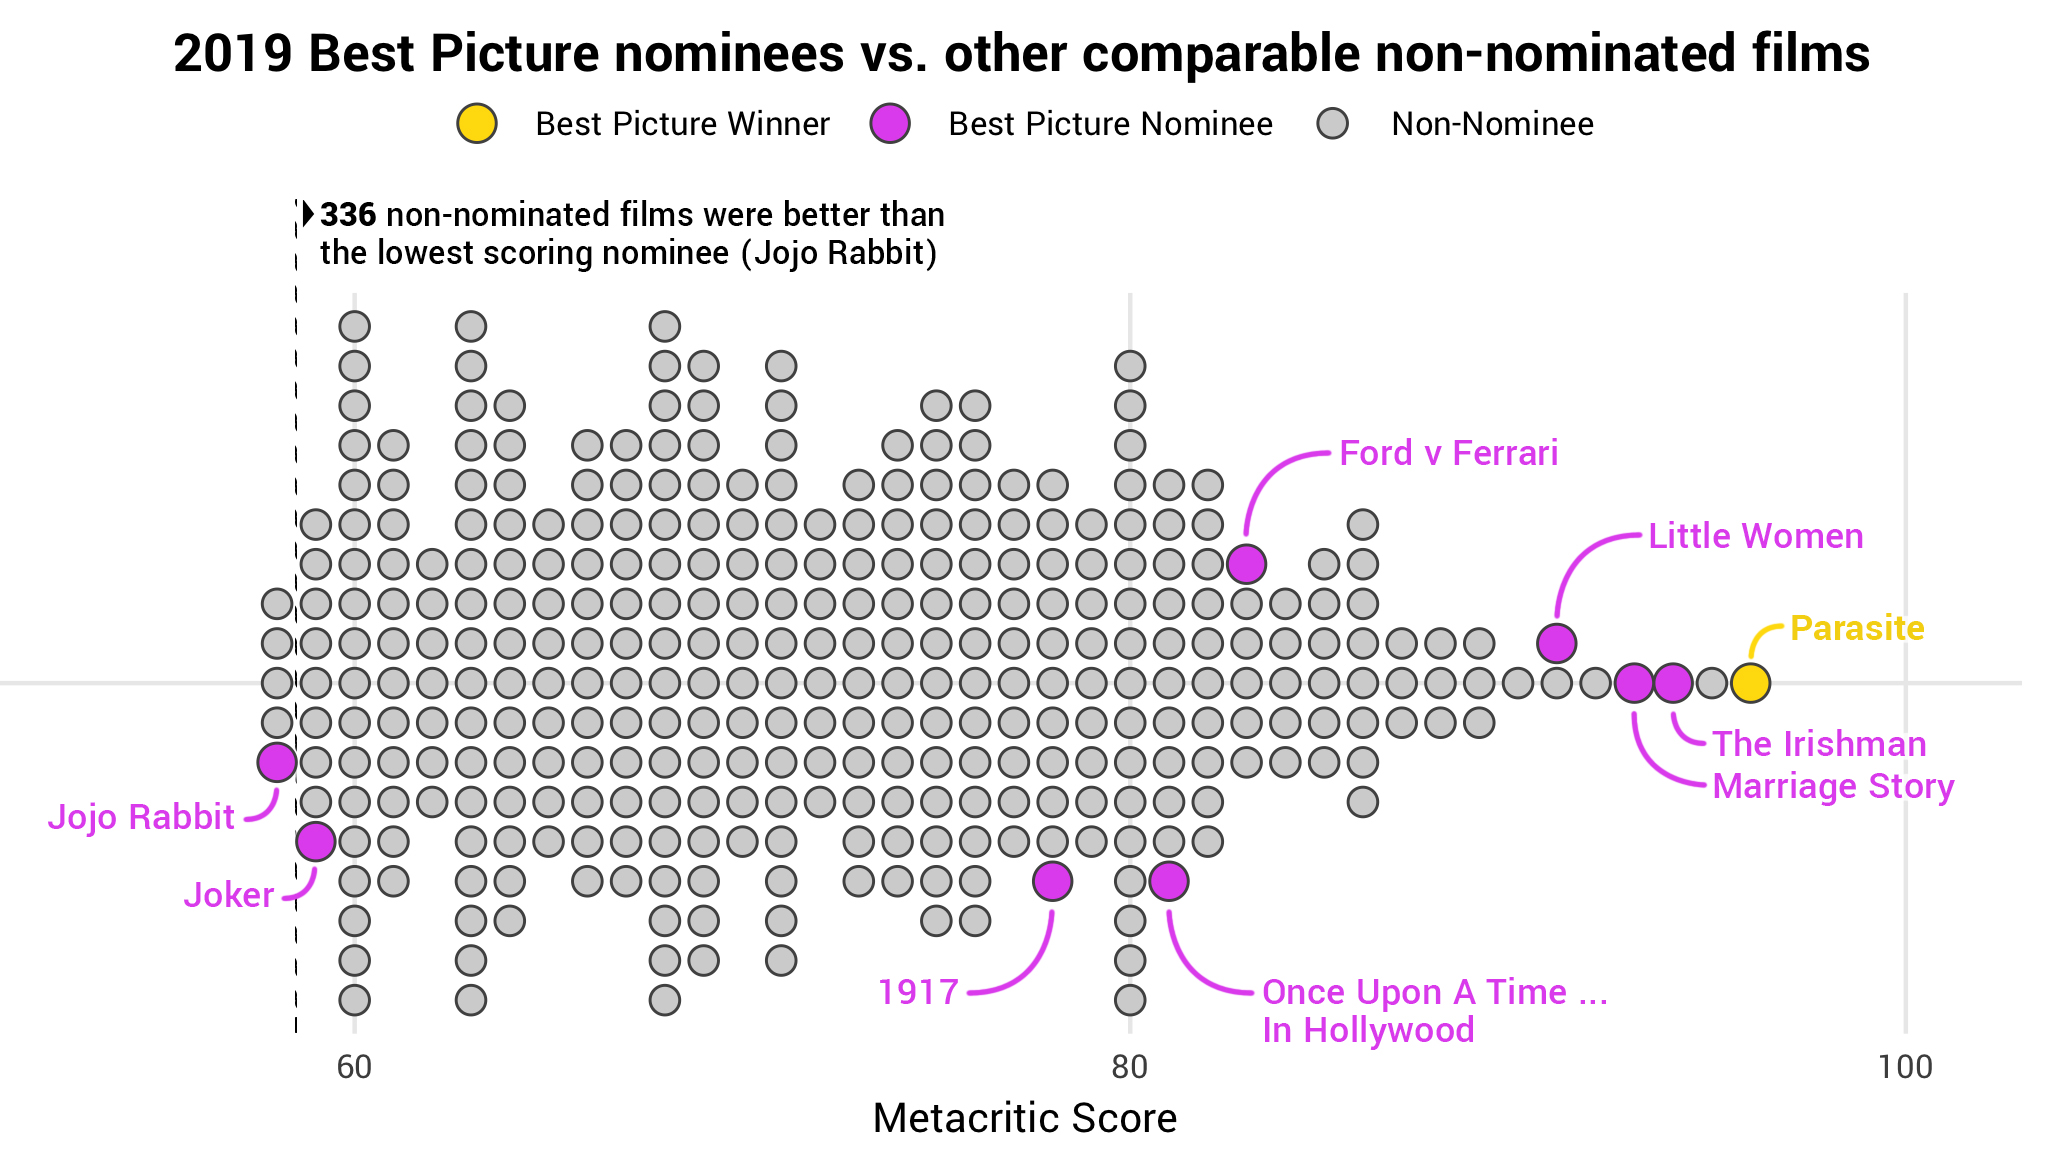 A visualization of some of the best movies of 2019, colored based on if they were a Best Picture nominee